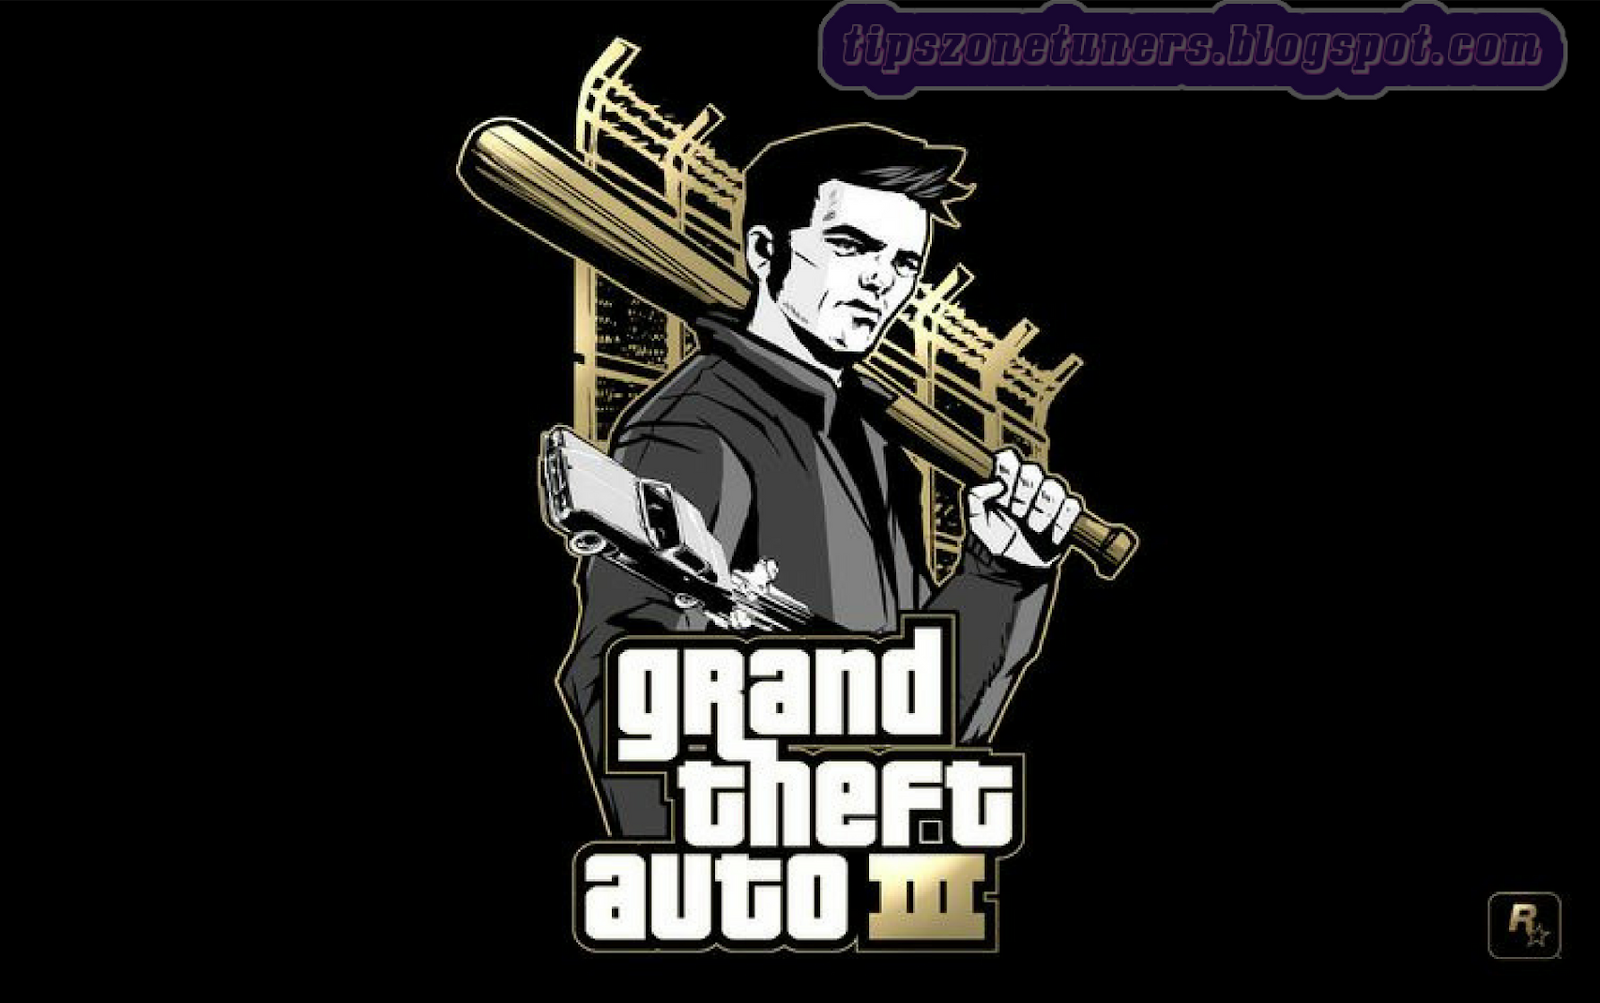 Grand Theft Auto 3 Apk Obb Free Download For Android - Colaboratory